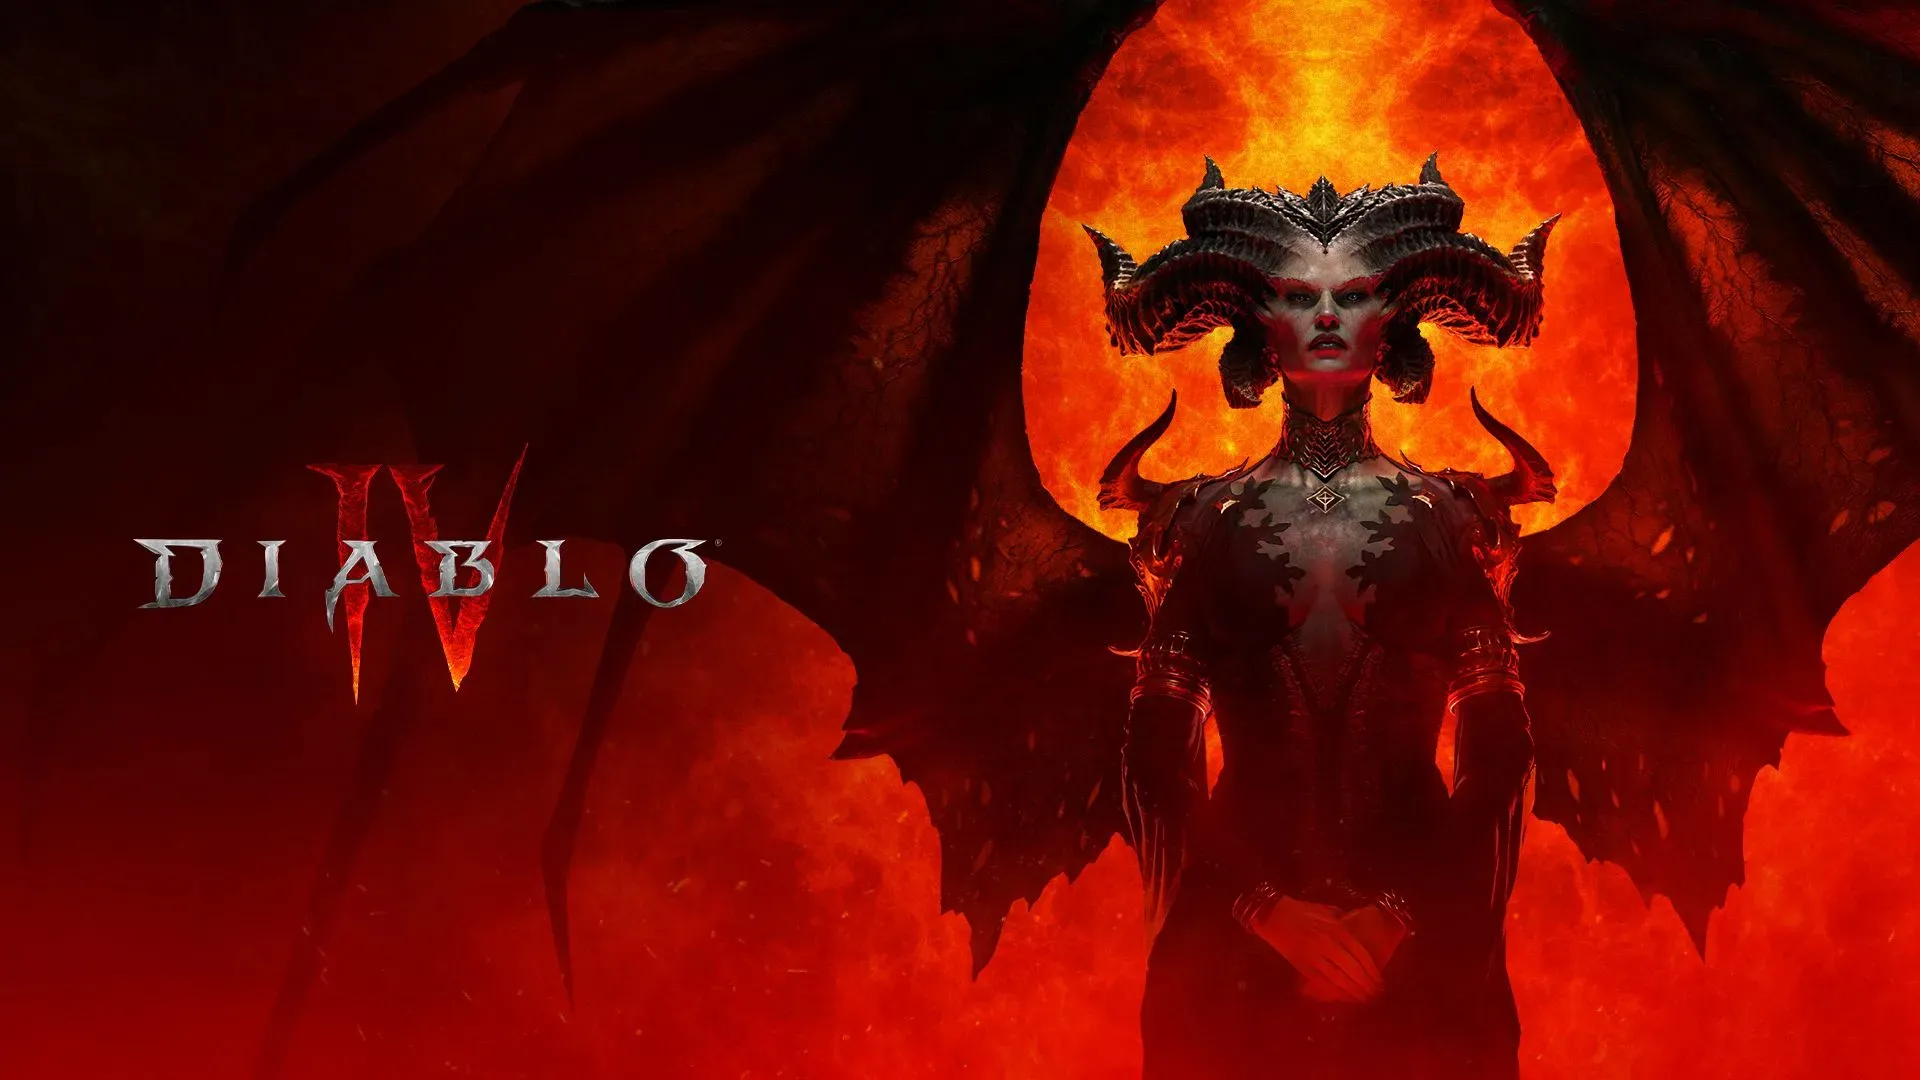 Here are some essential strategy tips to survive and beat Diablo 4 Hardcore mode, including using Elixir of Death Evasion & Scroll of Escape.